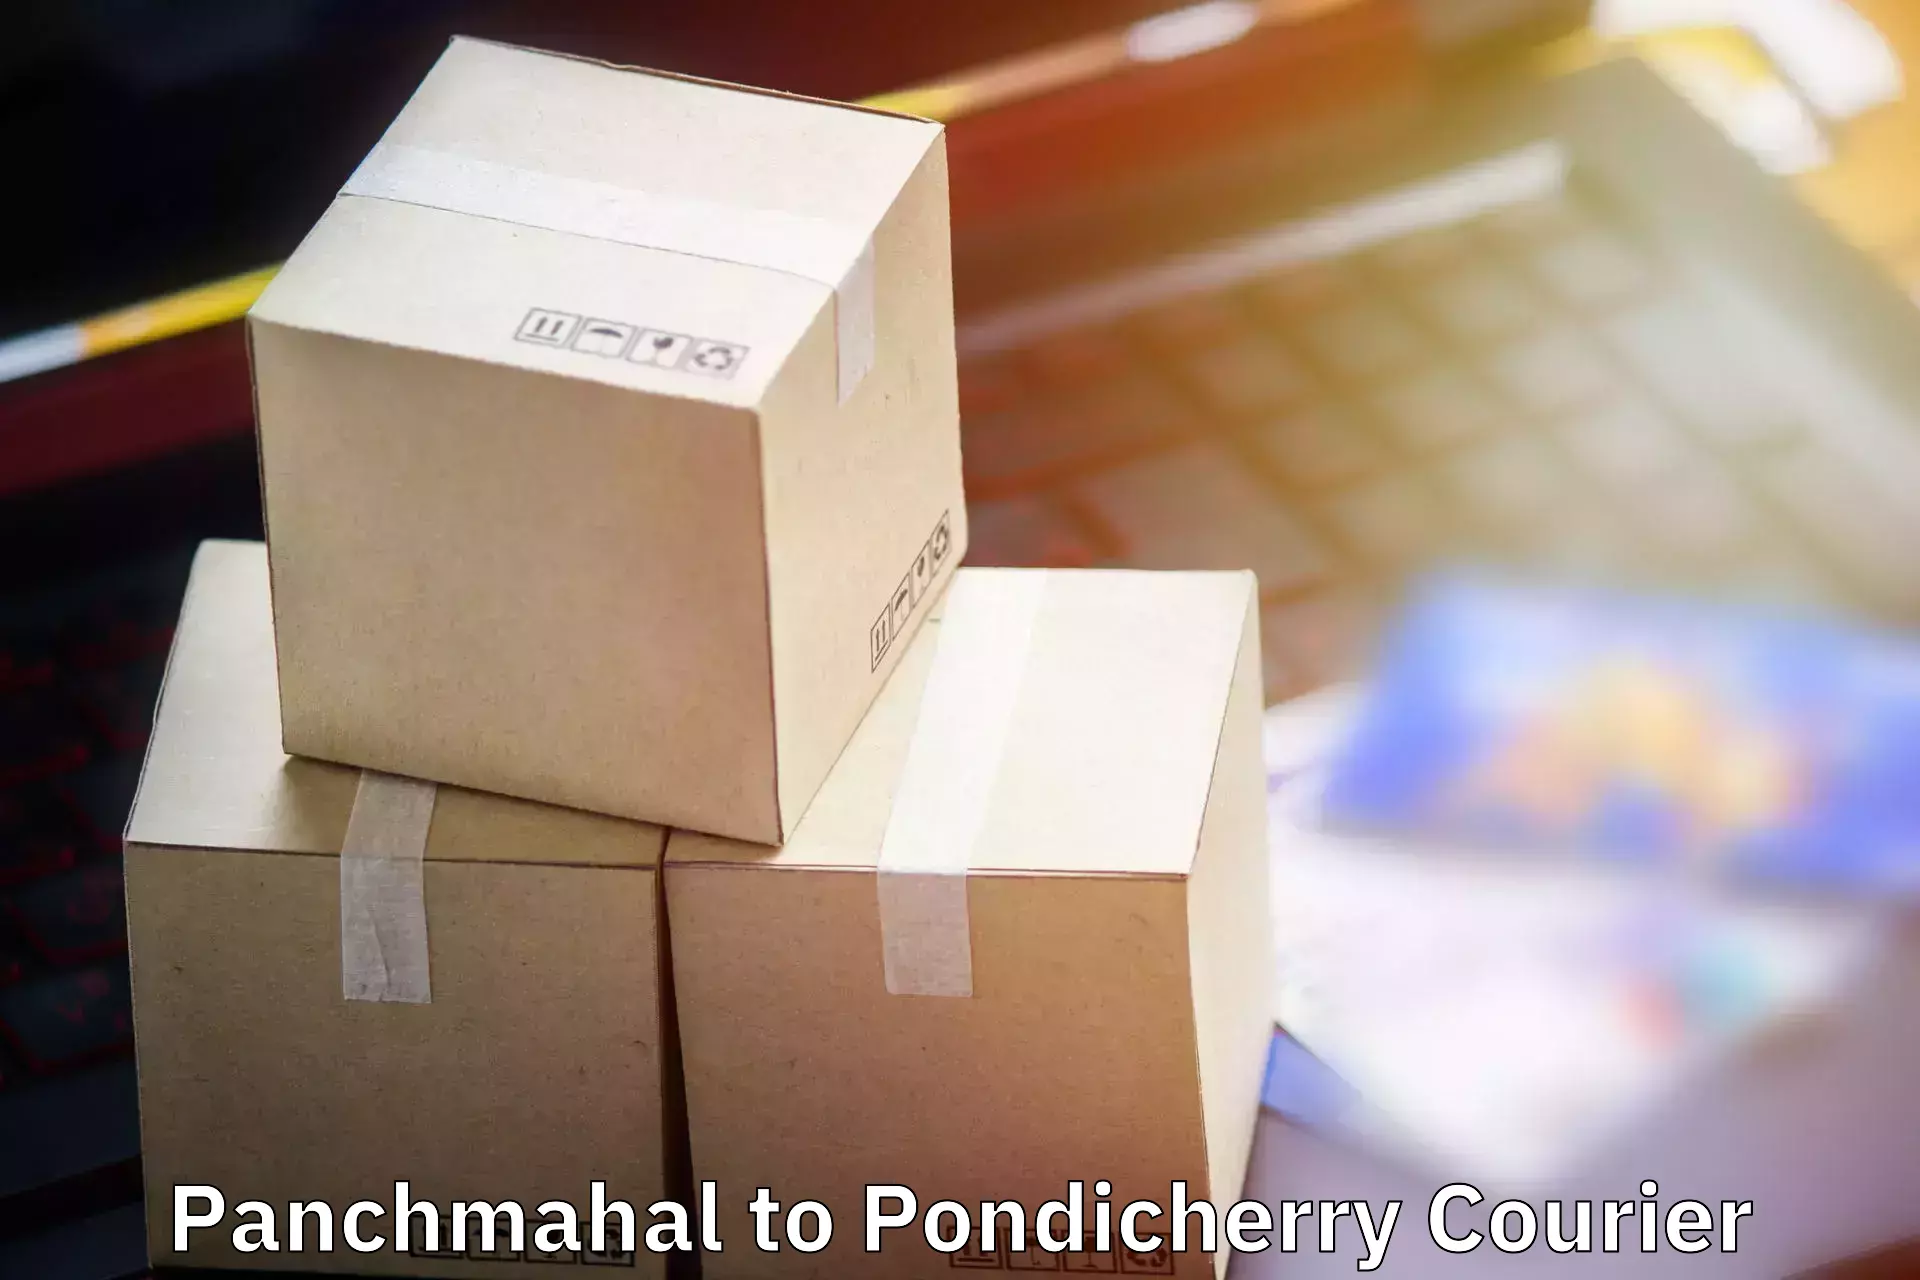 Luggage delivery system Panchmahal to Pondicherry University